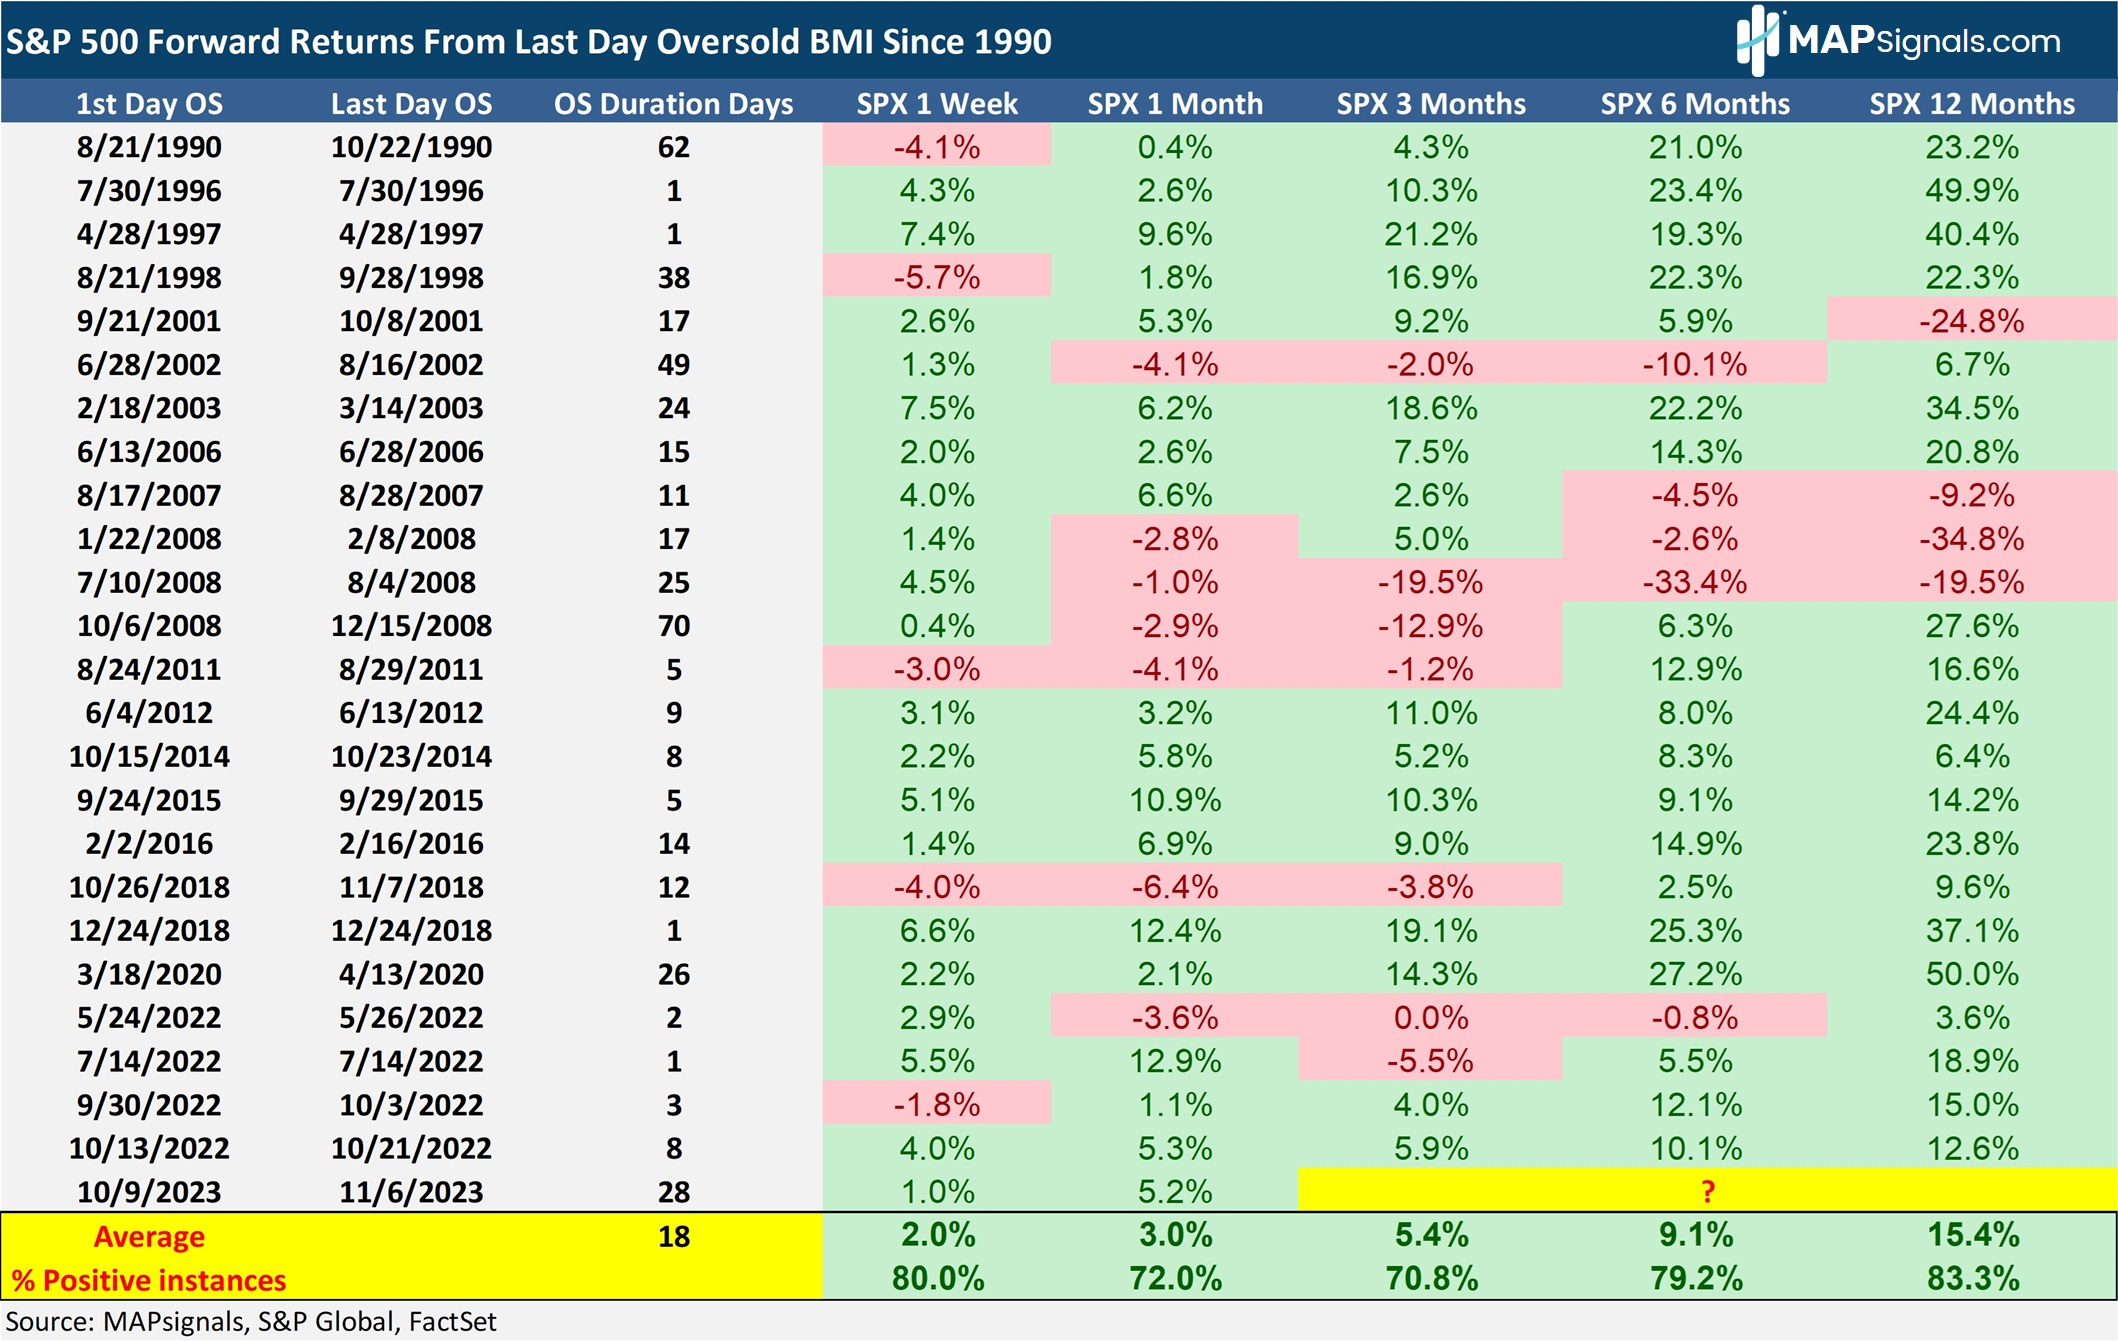 S&P 500 Forward Returns from last day Oversold Big Money Index (BMI) | MAPsignals